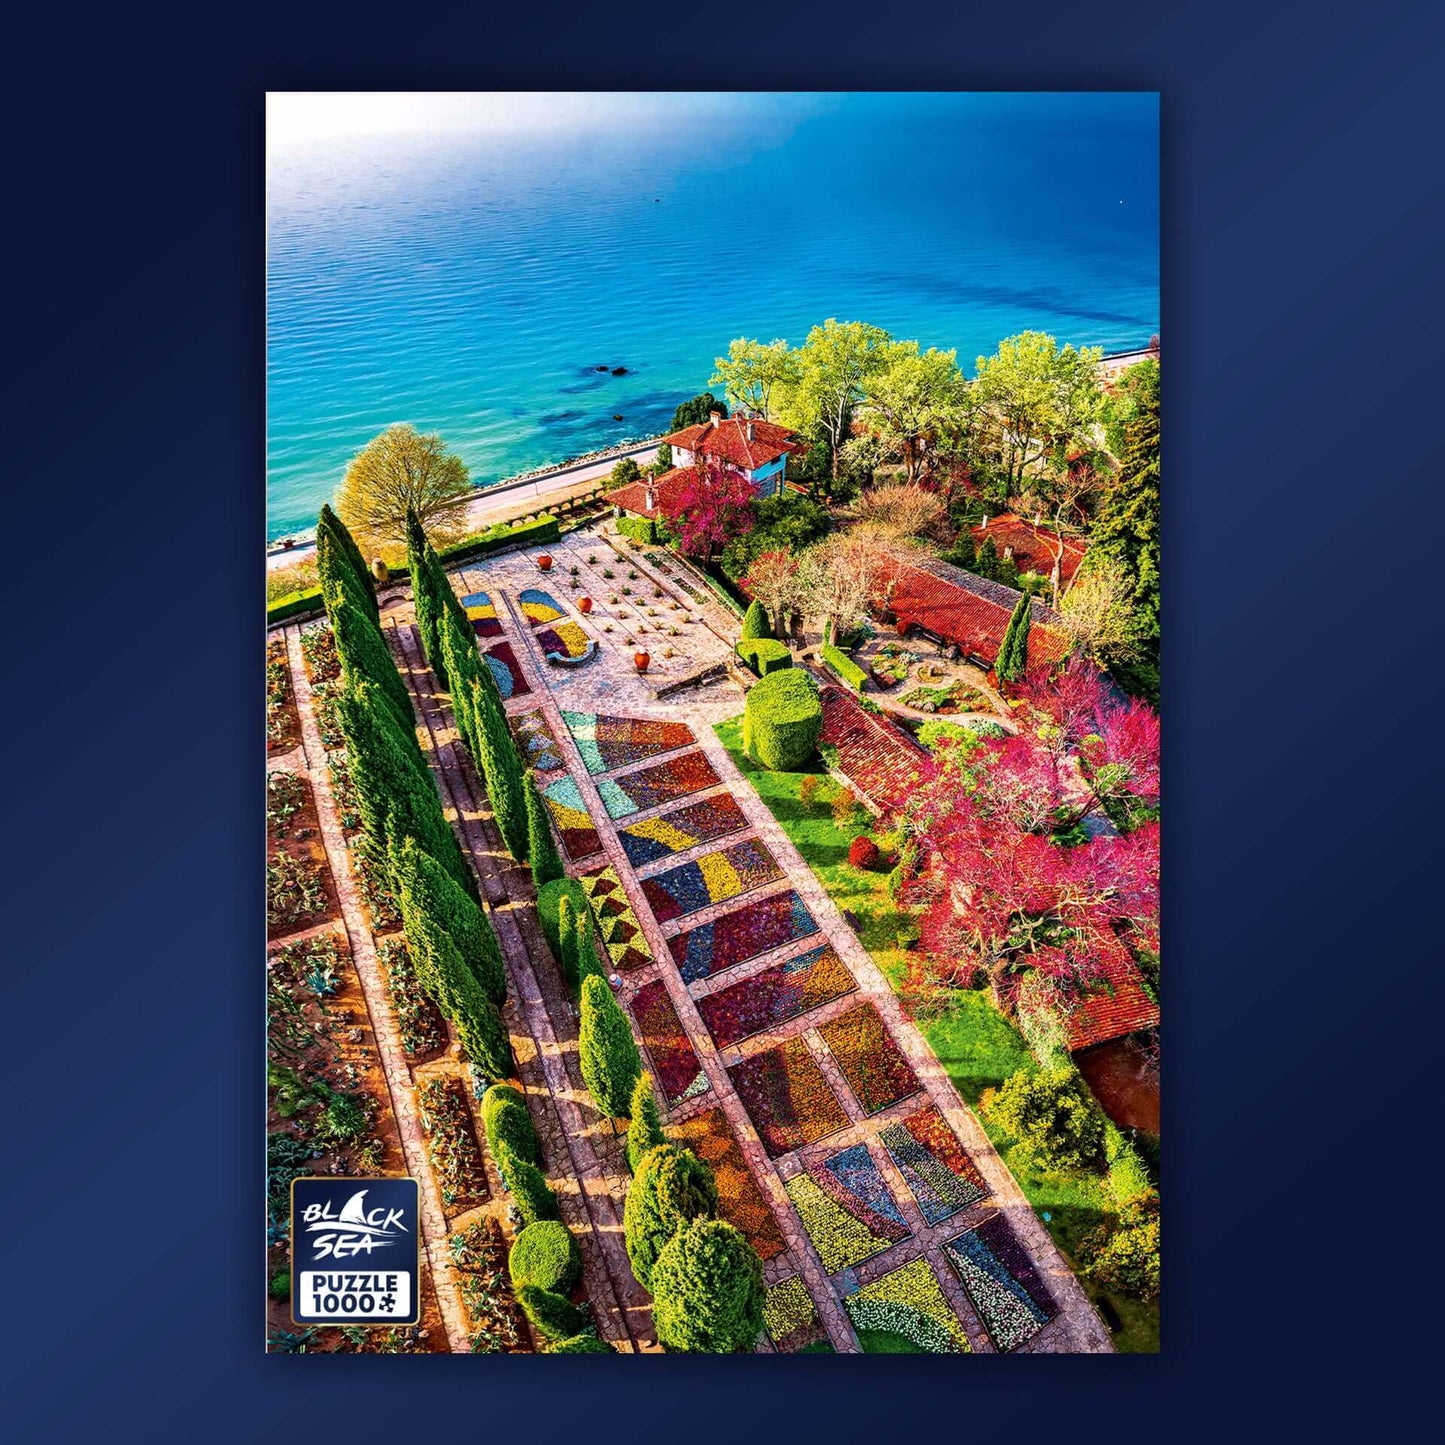 Puzzle Black Sea Premium 1000 pieces - Balchik Botanical Garden, The exceptional work of Vladislav Terziiski invites us to enjoy the beauty of nature, which reigns in the Botanical Garden in Balchik. It tells a story about the harmony between the plants’